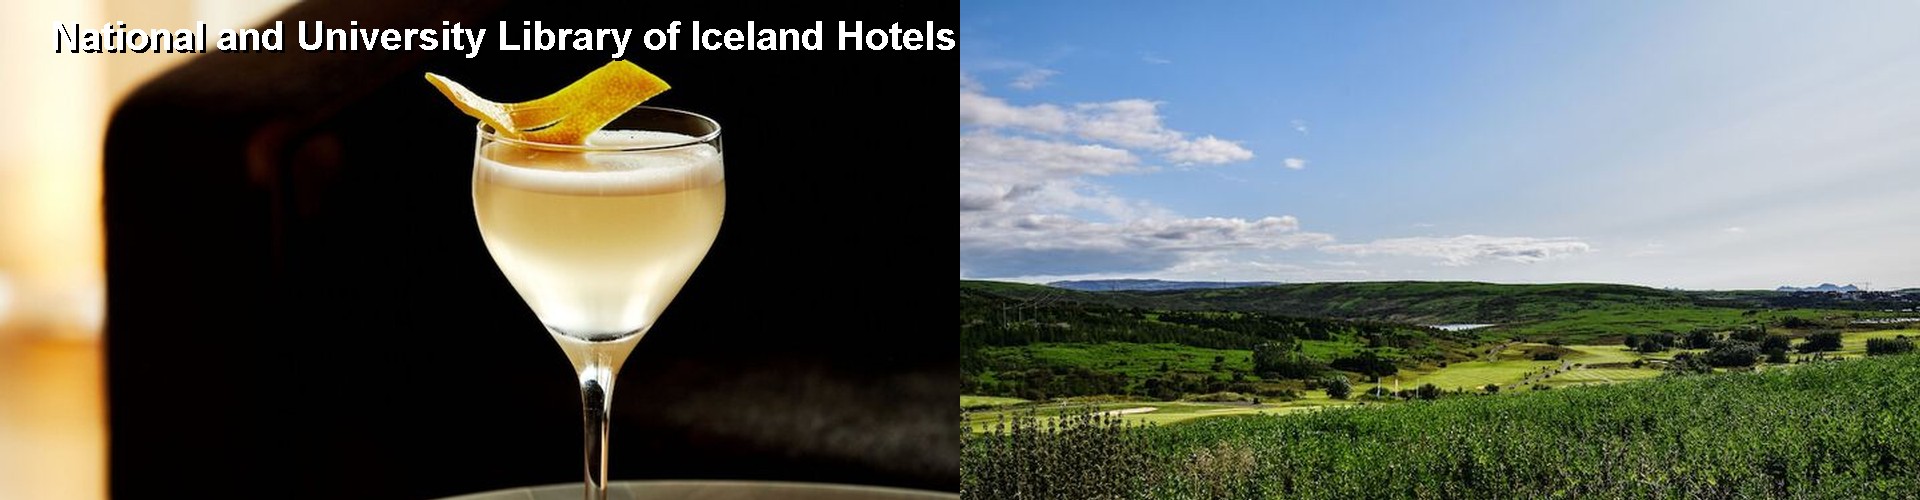 5 Best Hotels near National and University Library of Iceland